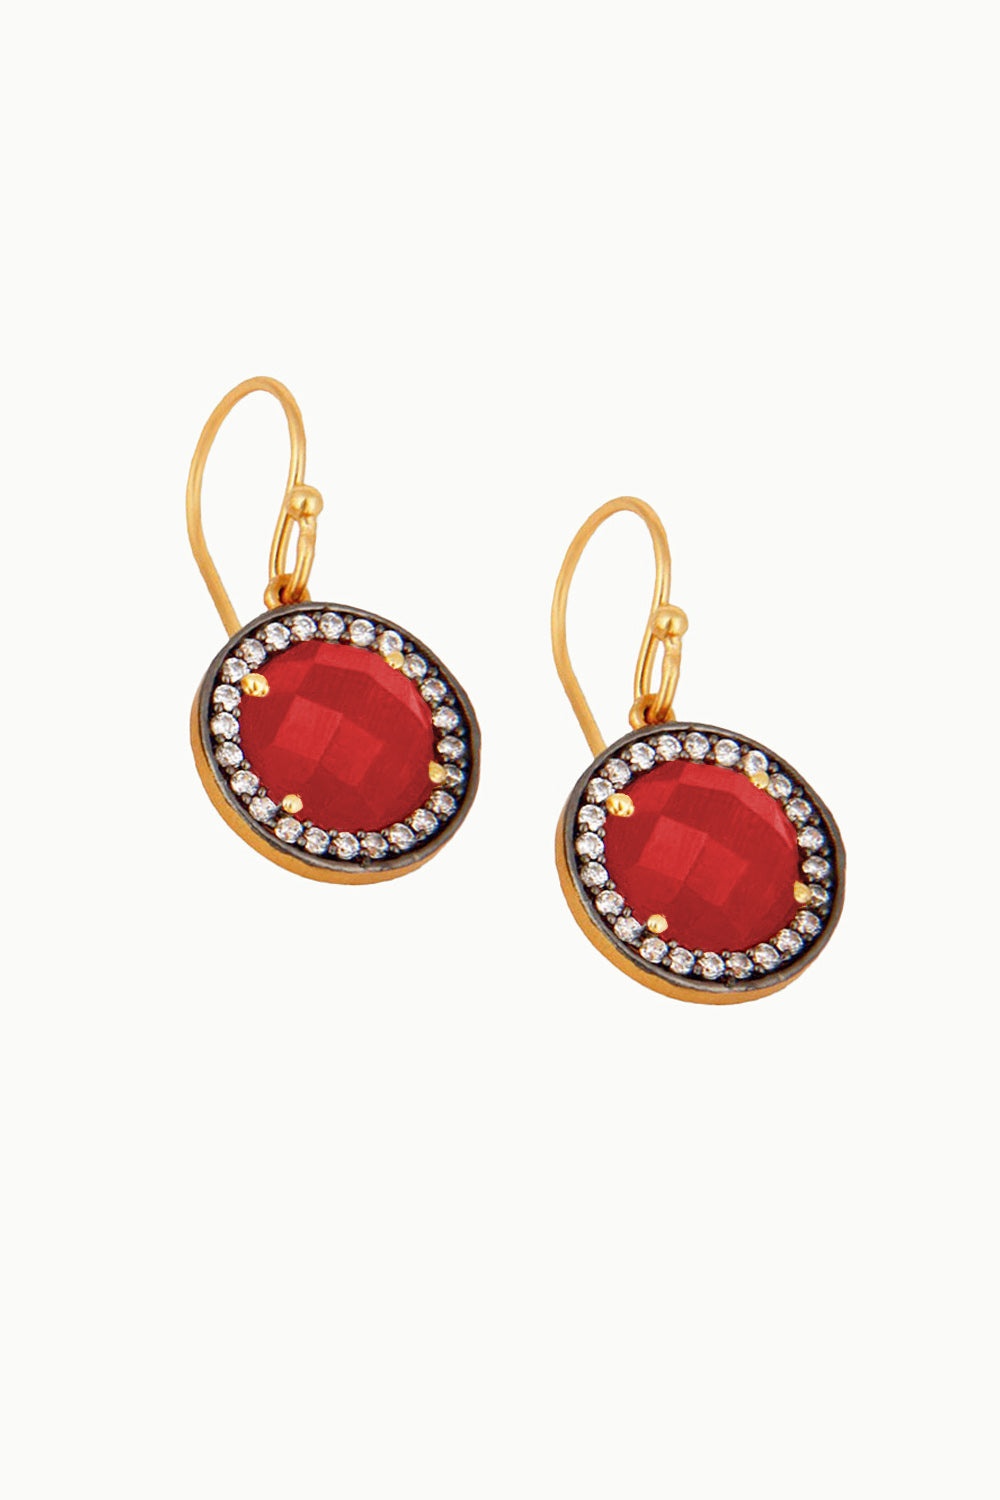 Red Onyx Gold Vermeil Earrings - Halo